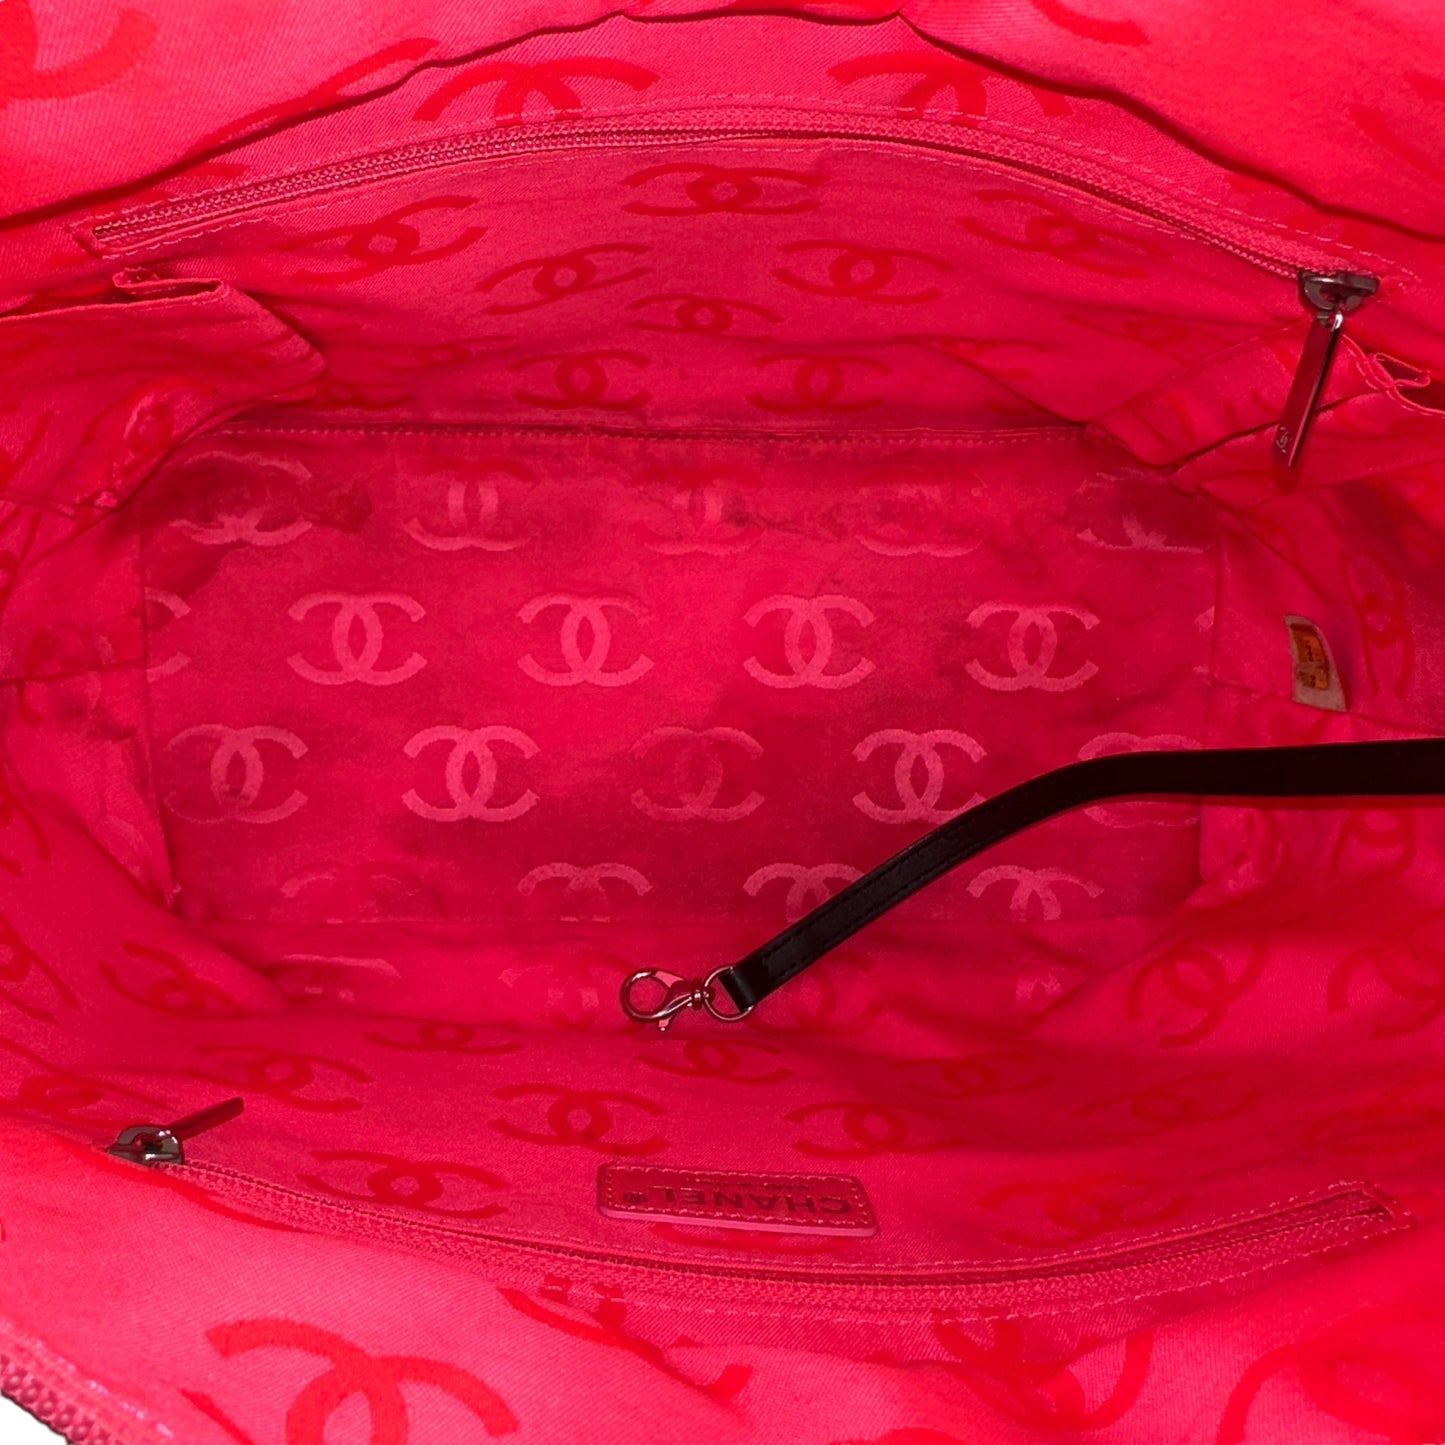 Chanel Cambon Matelasse Leather Tote Bag